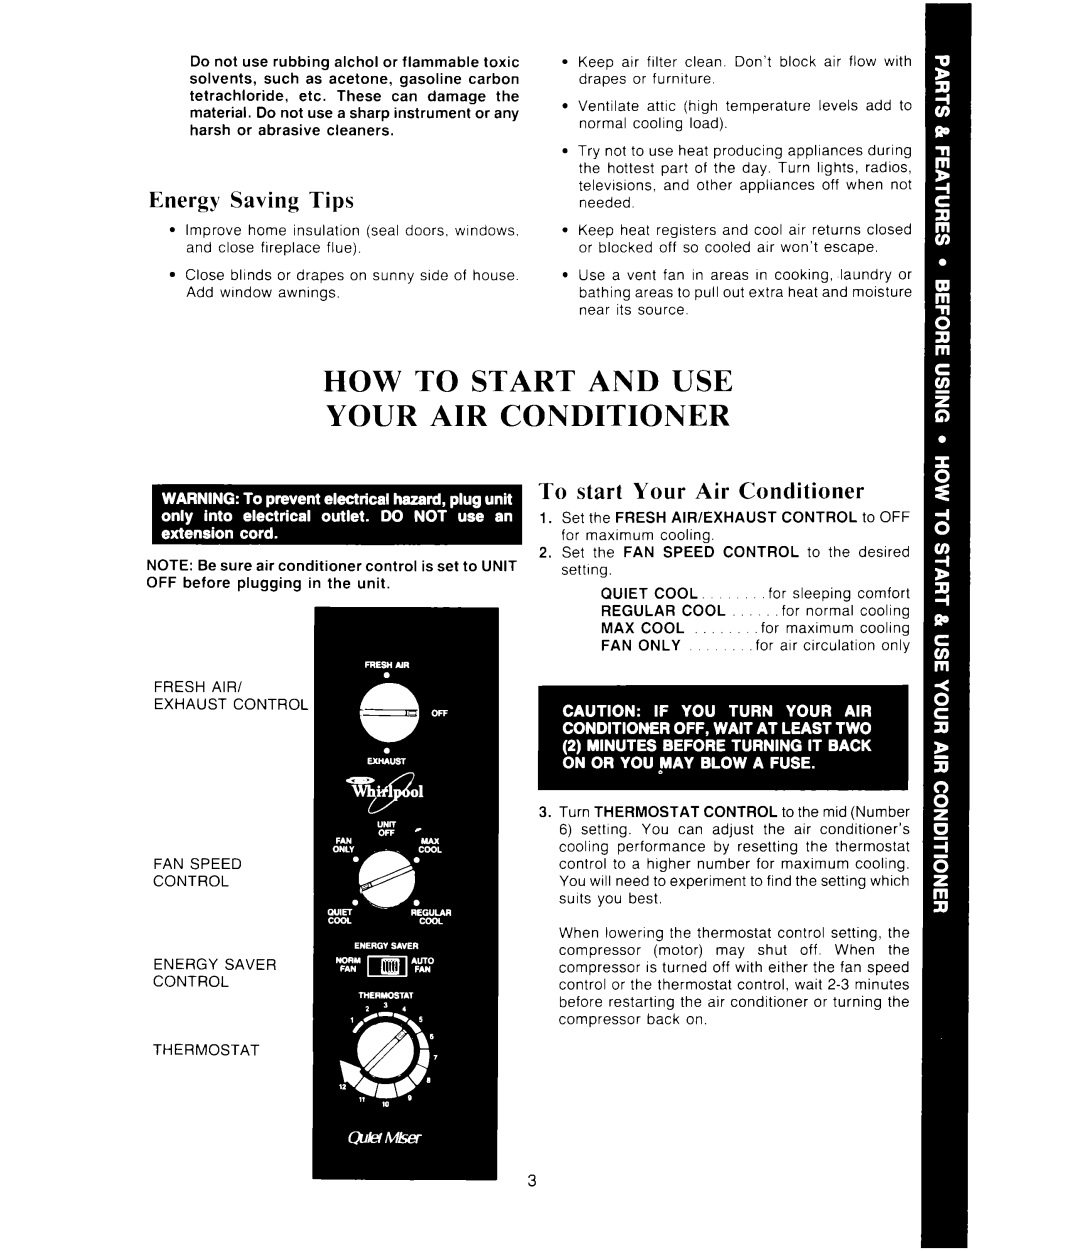 Whirlpool AC1 352 manual How To Start And Use Your Air Conditioner, Energy Saving Tips, To start Your Air Conditioner 